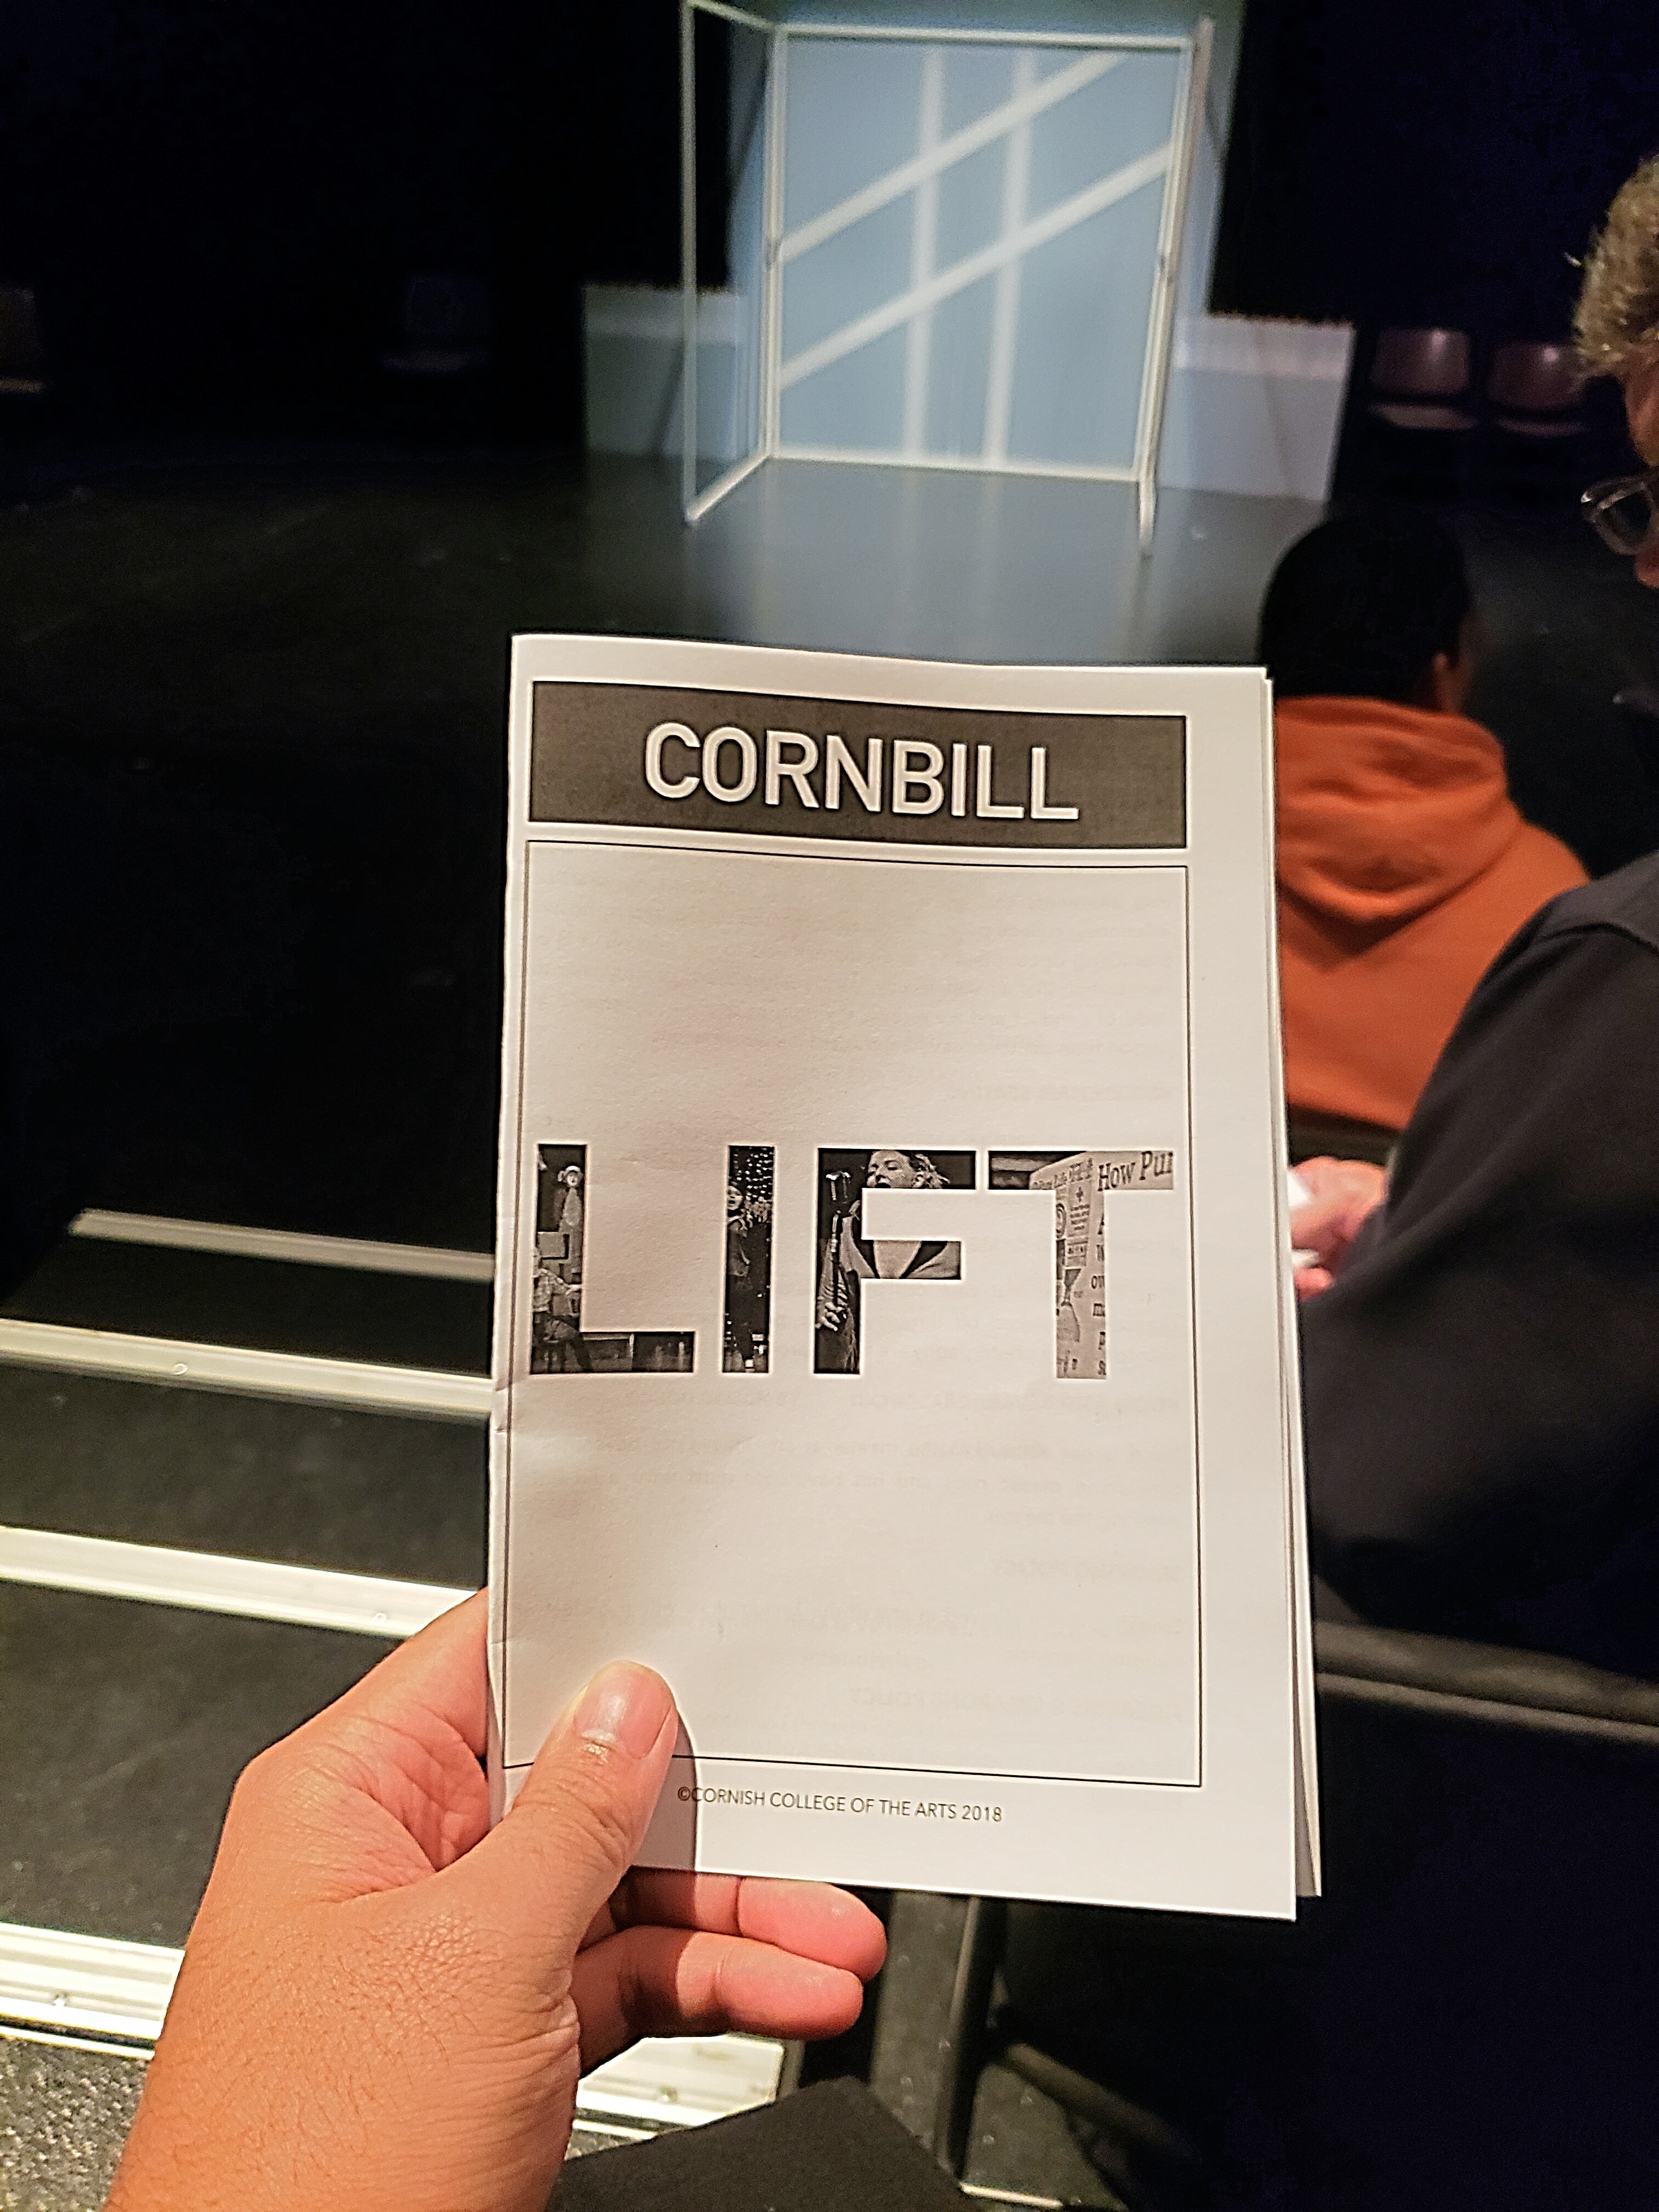 Evening performance of LIFT - Musical. Incredible talent and great music. Sadly, the storyline was so imaginative that it became hard to follow.